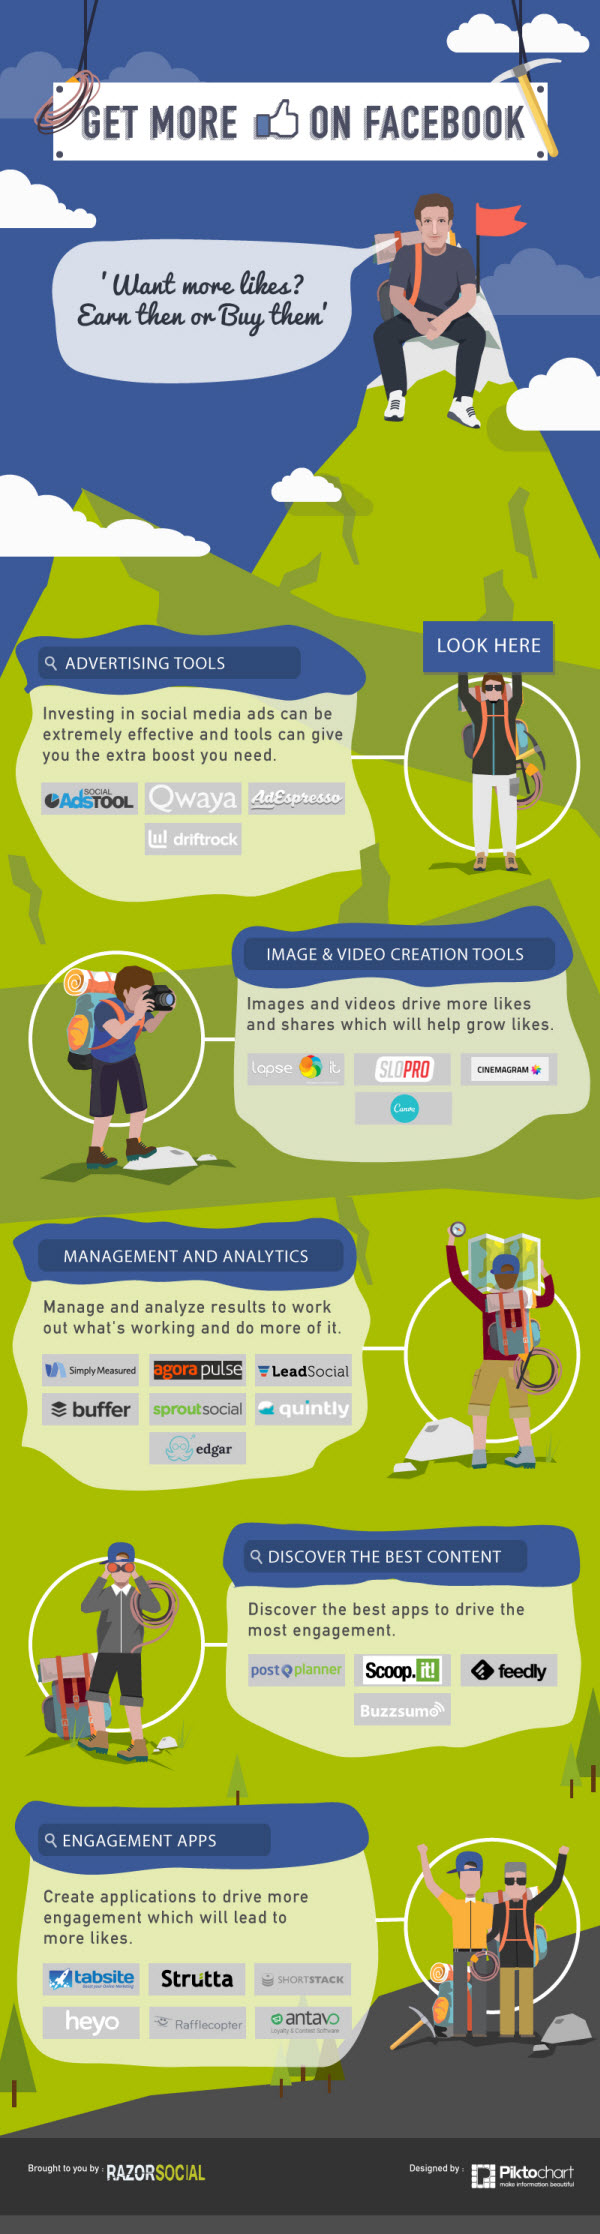 25 Facebook Tools Marketers Should Consider - infographic